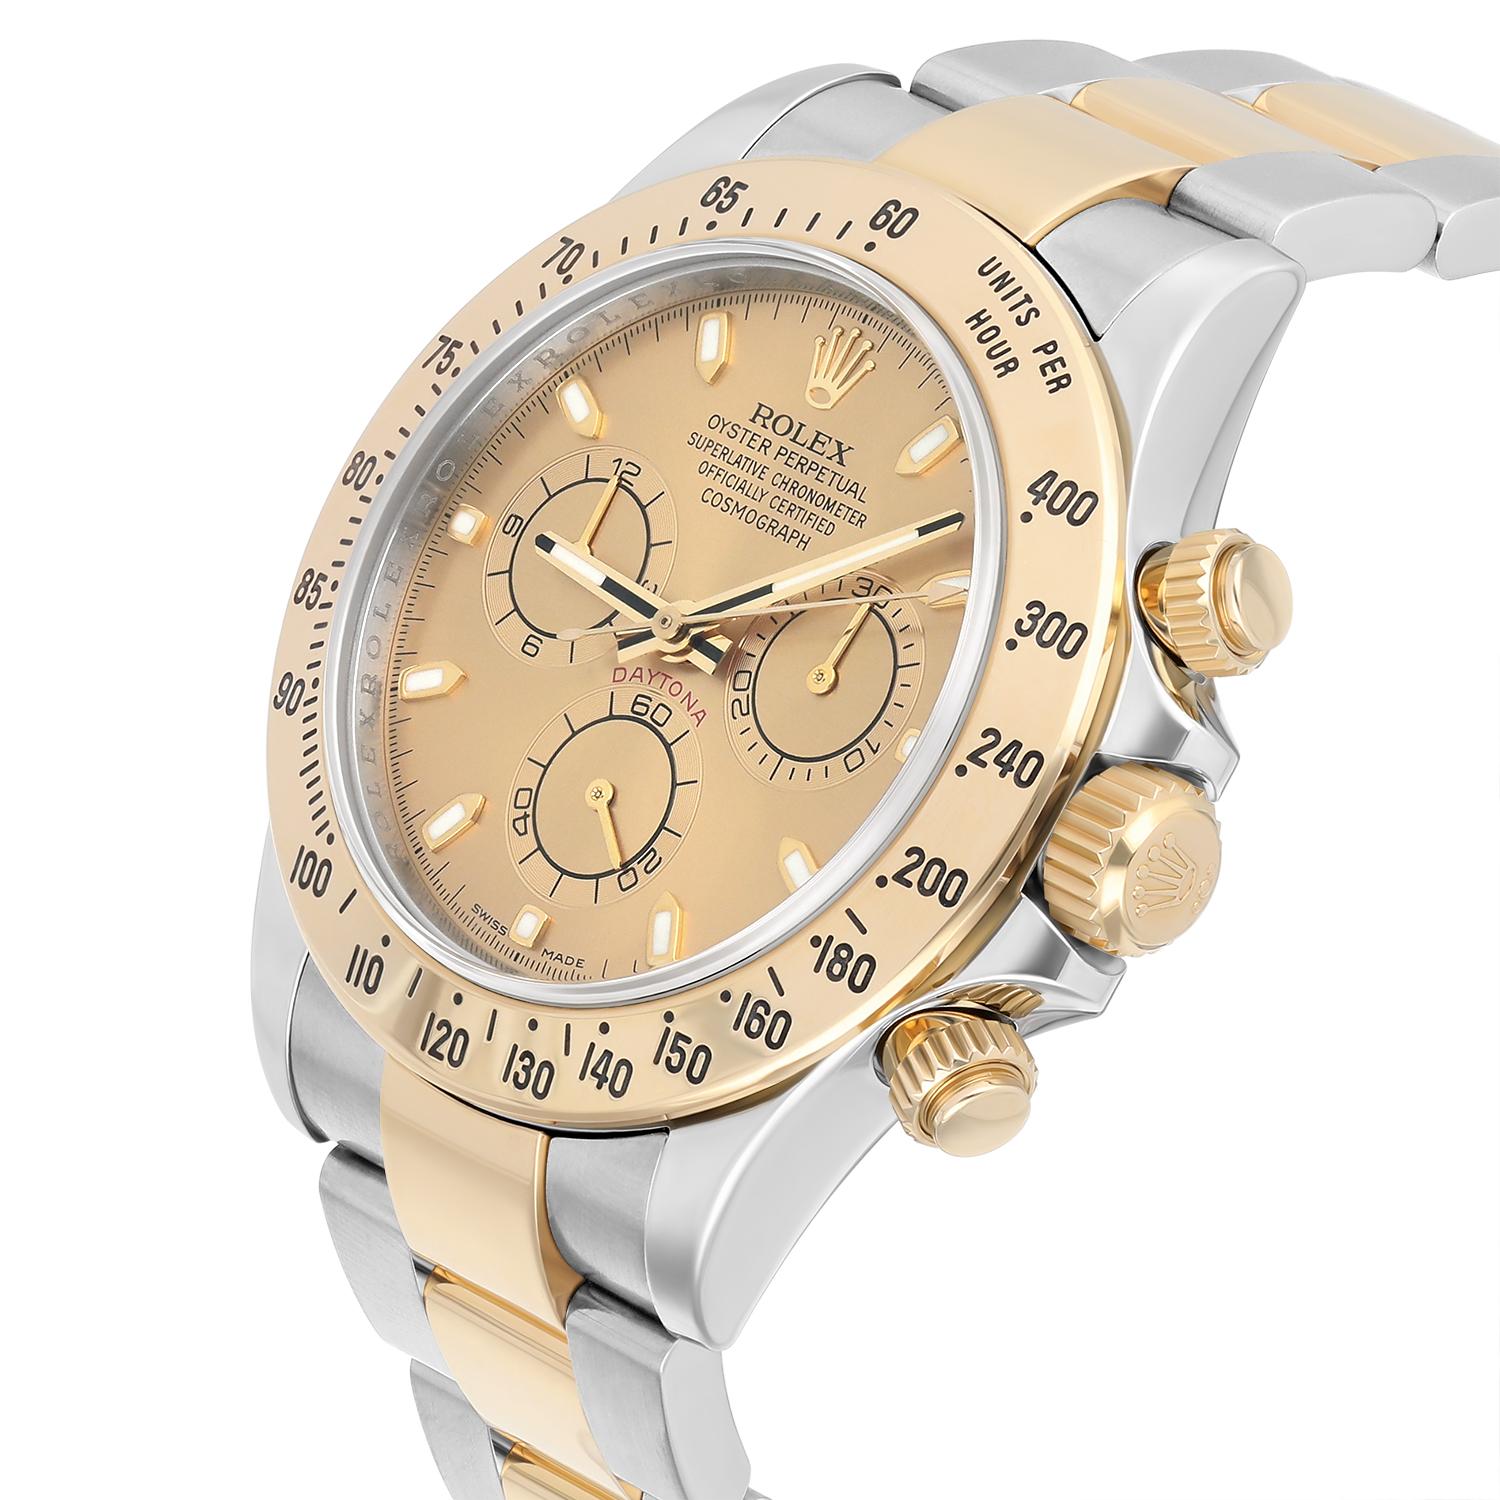 Rolex Daytona Stainless Steel Yellow Gold Champagne Dial Mens Watch 116523 For Sale 1